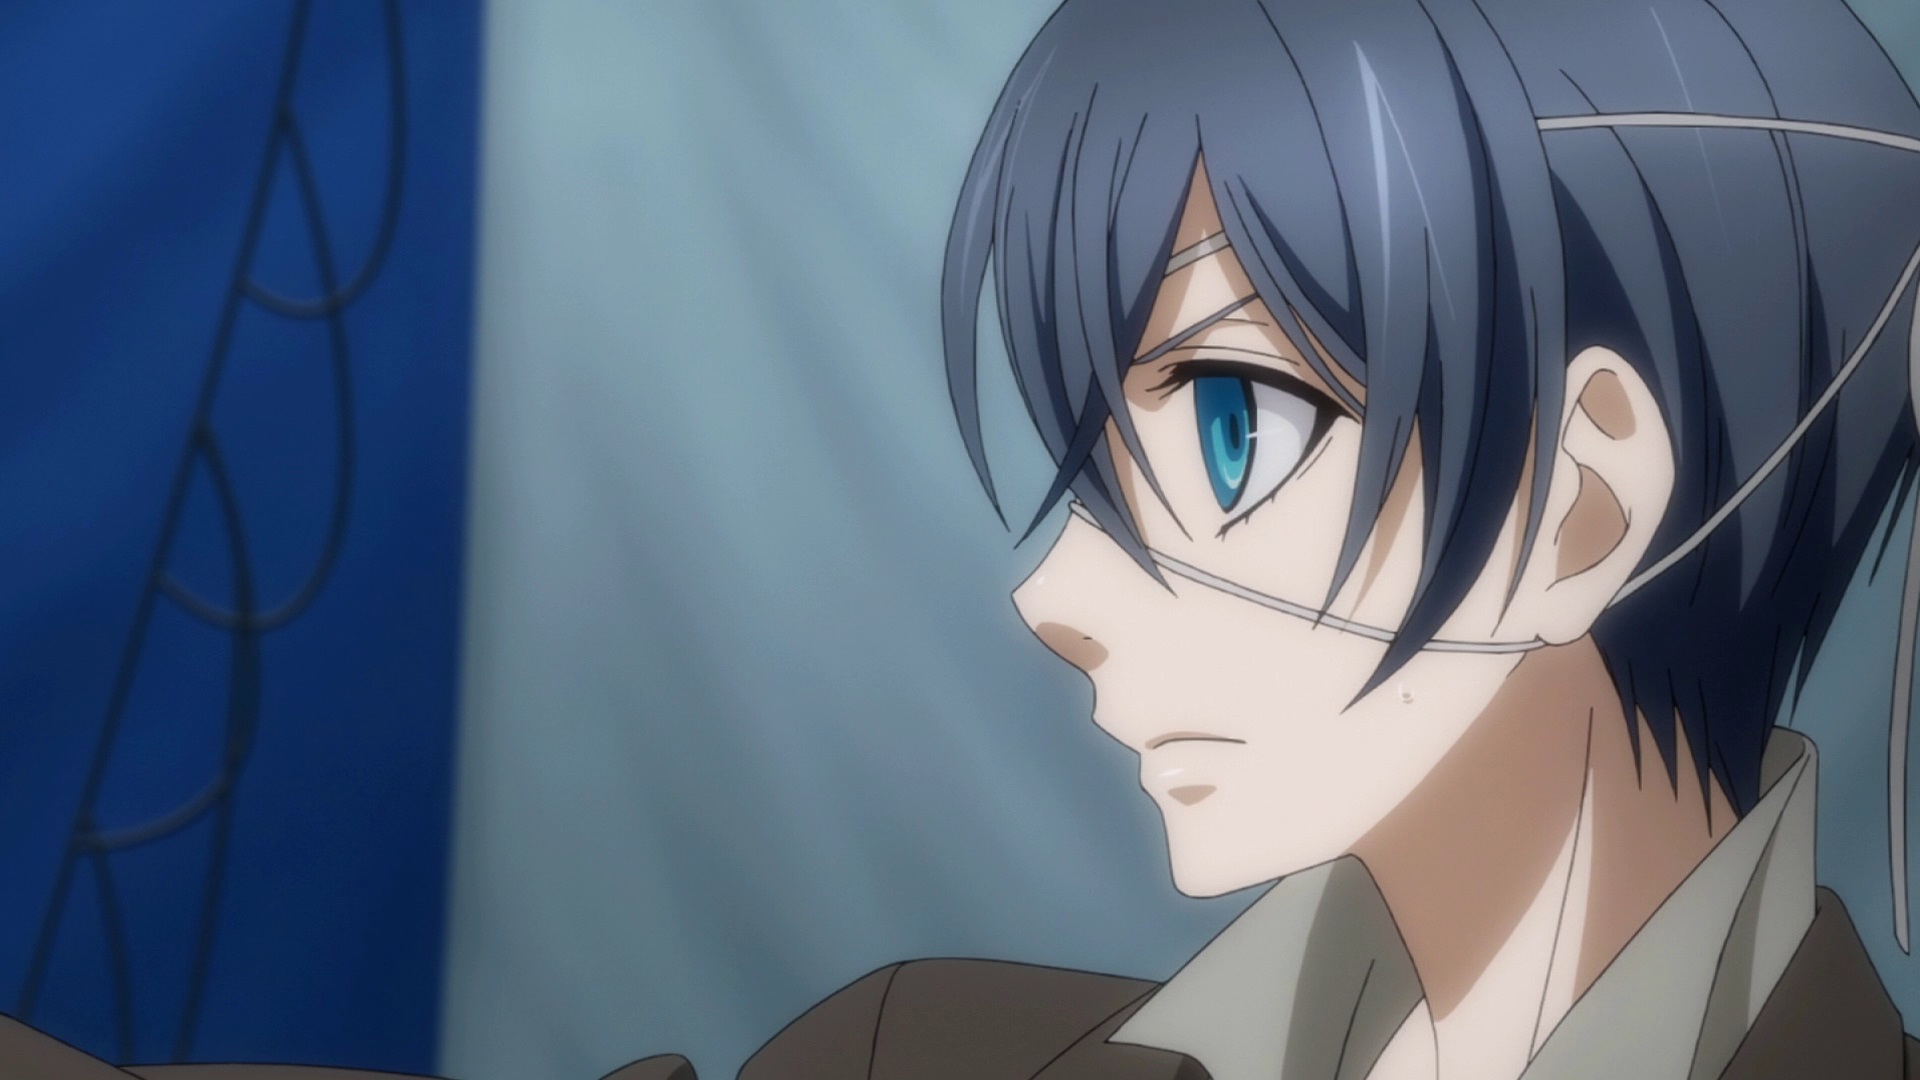 Funimation Gives Update About Black Butler Loss